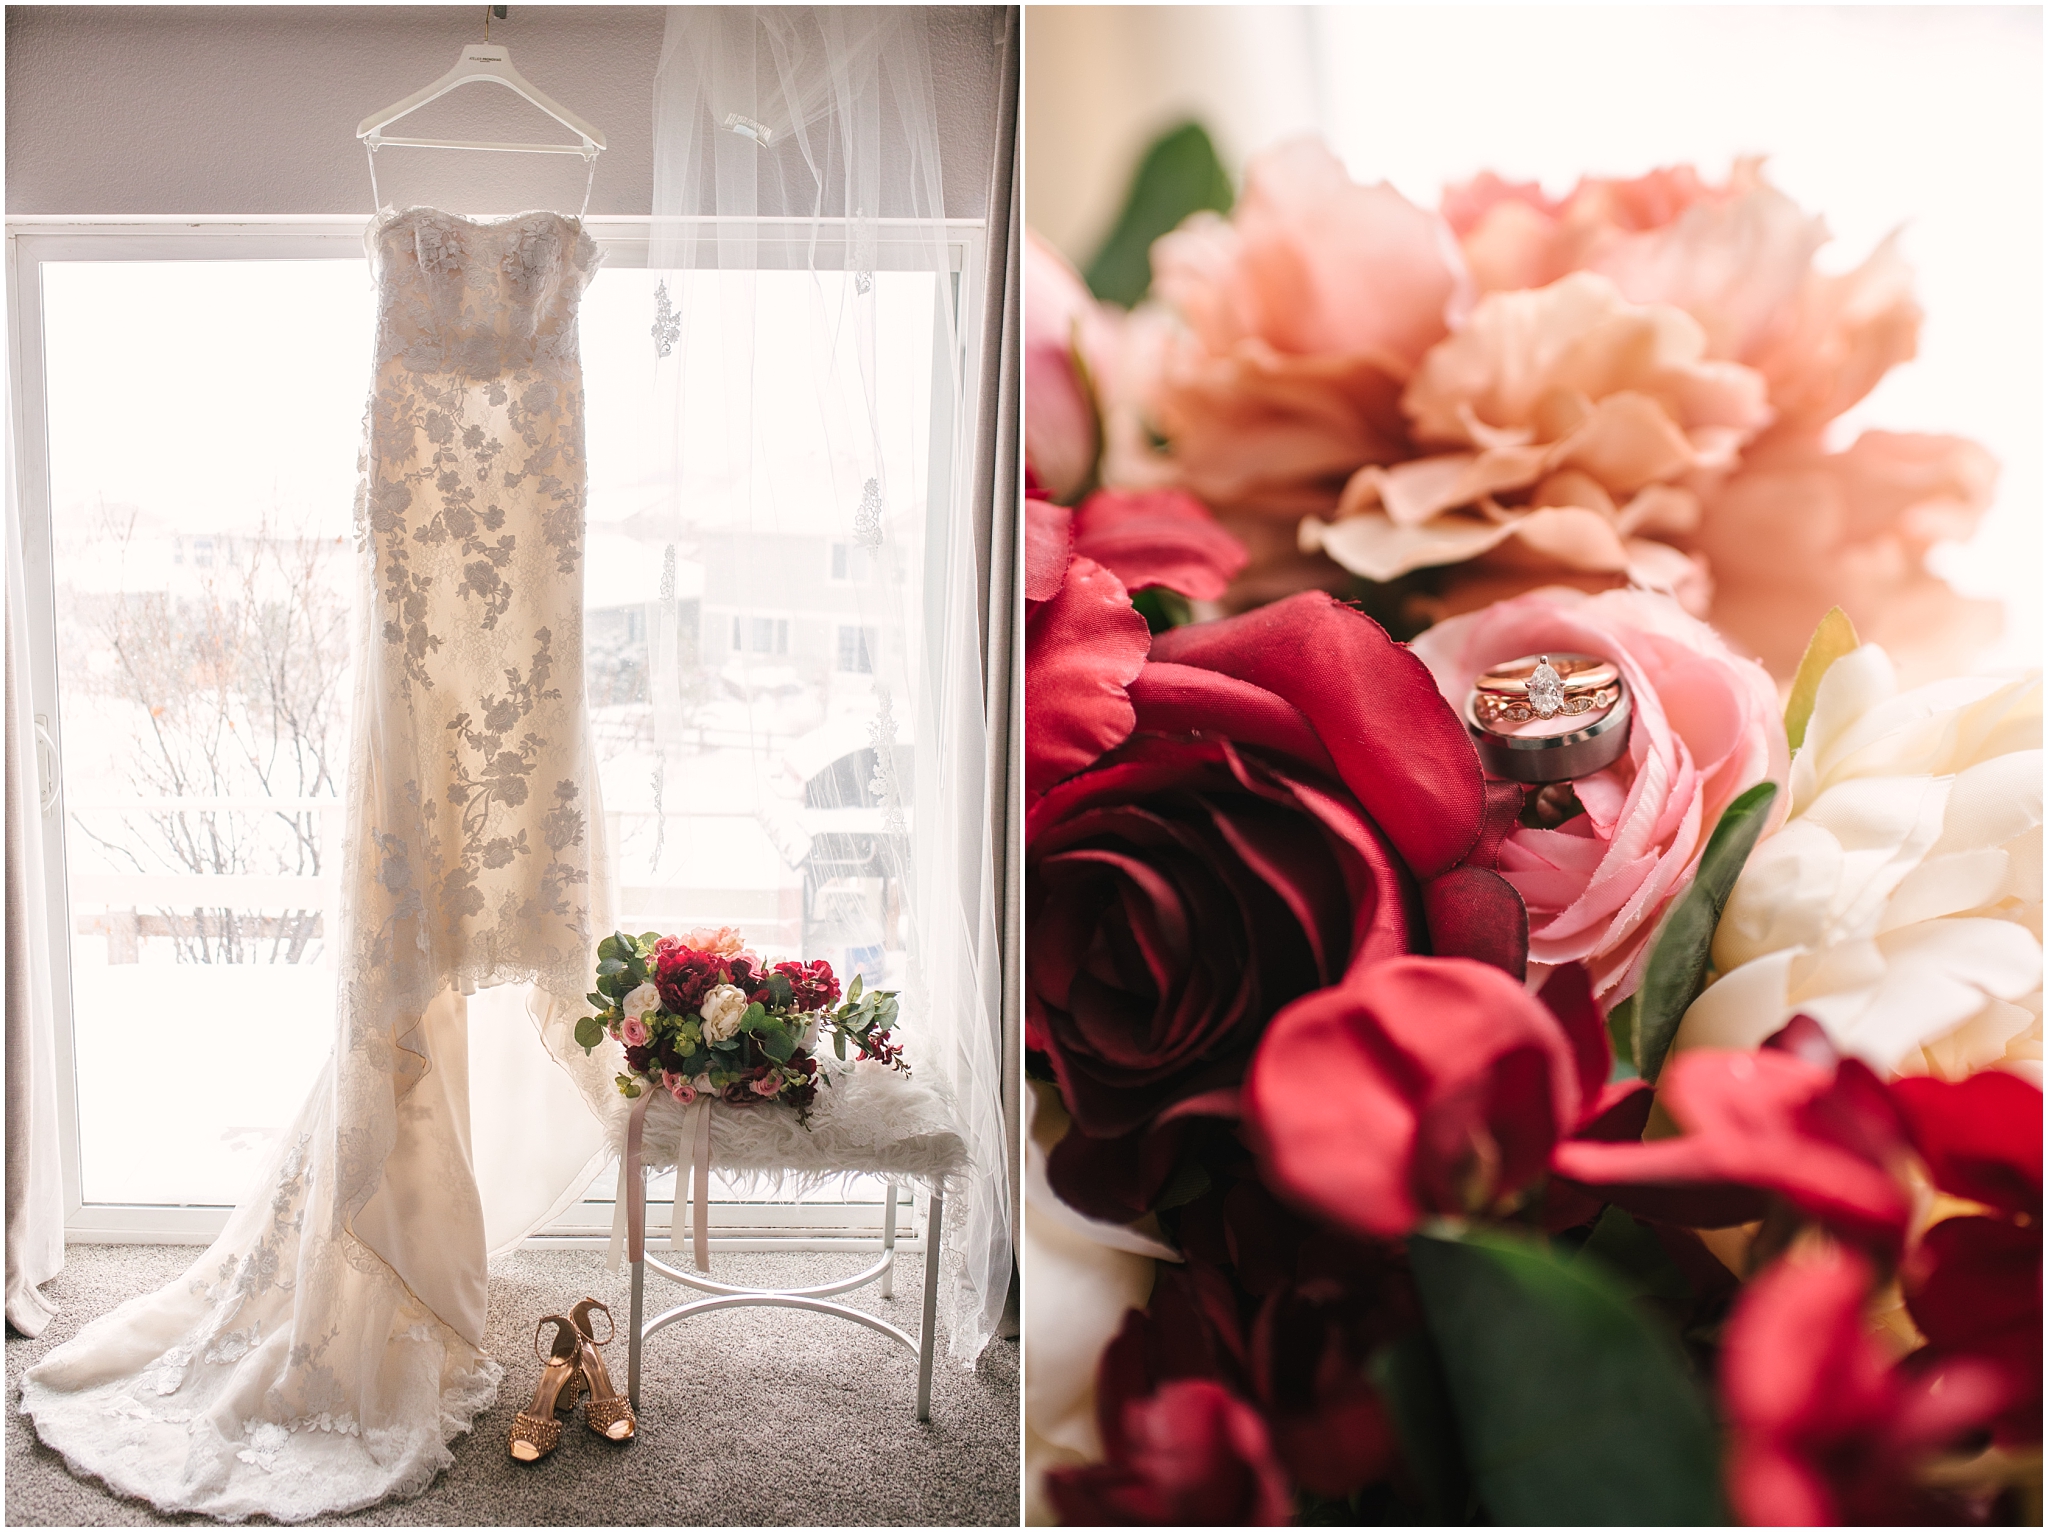 Bridal details for winter wedding: burgundy and pink silk flowers, gold studded shoes, wedding dress by Pronovias